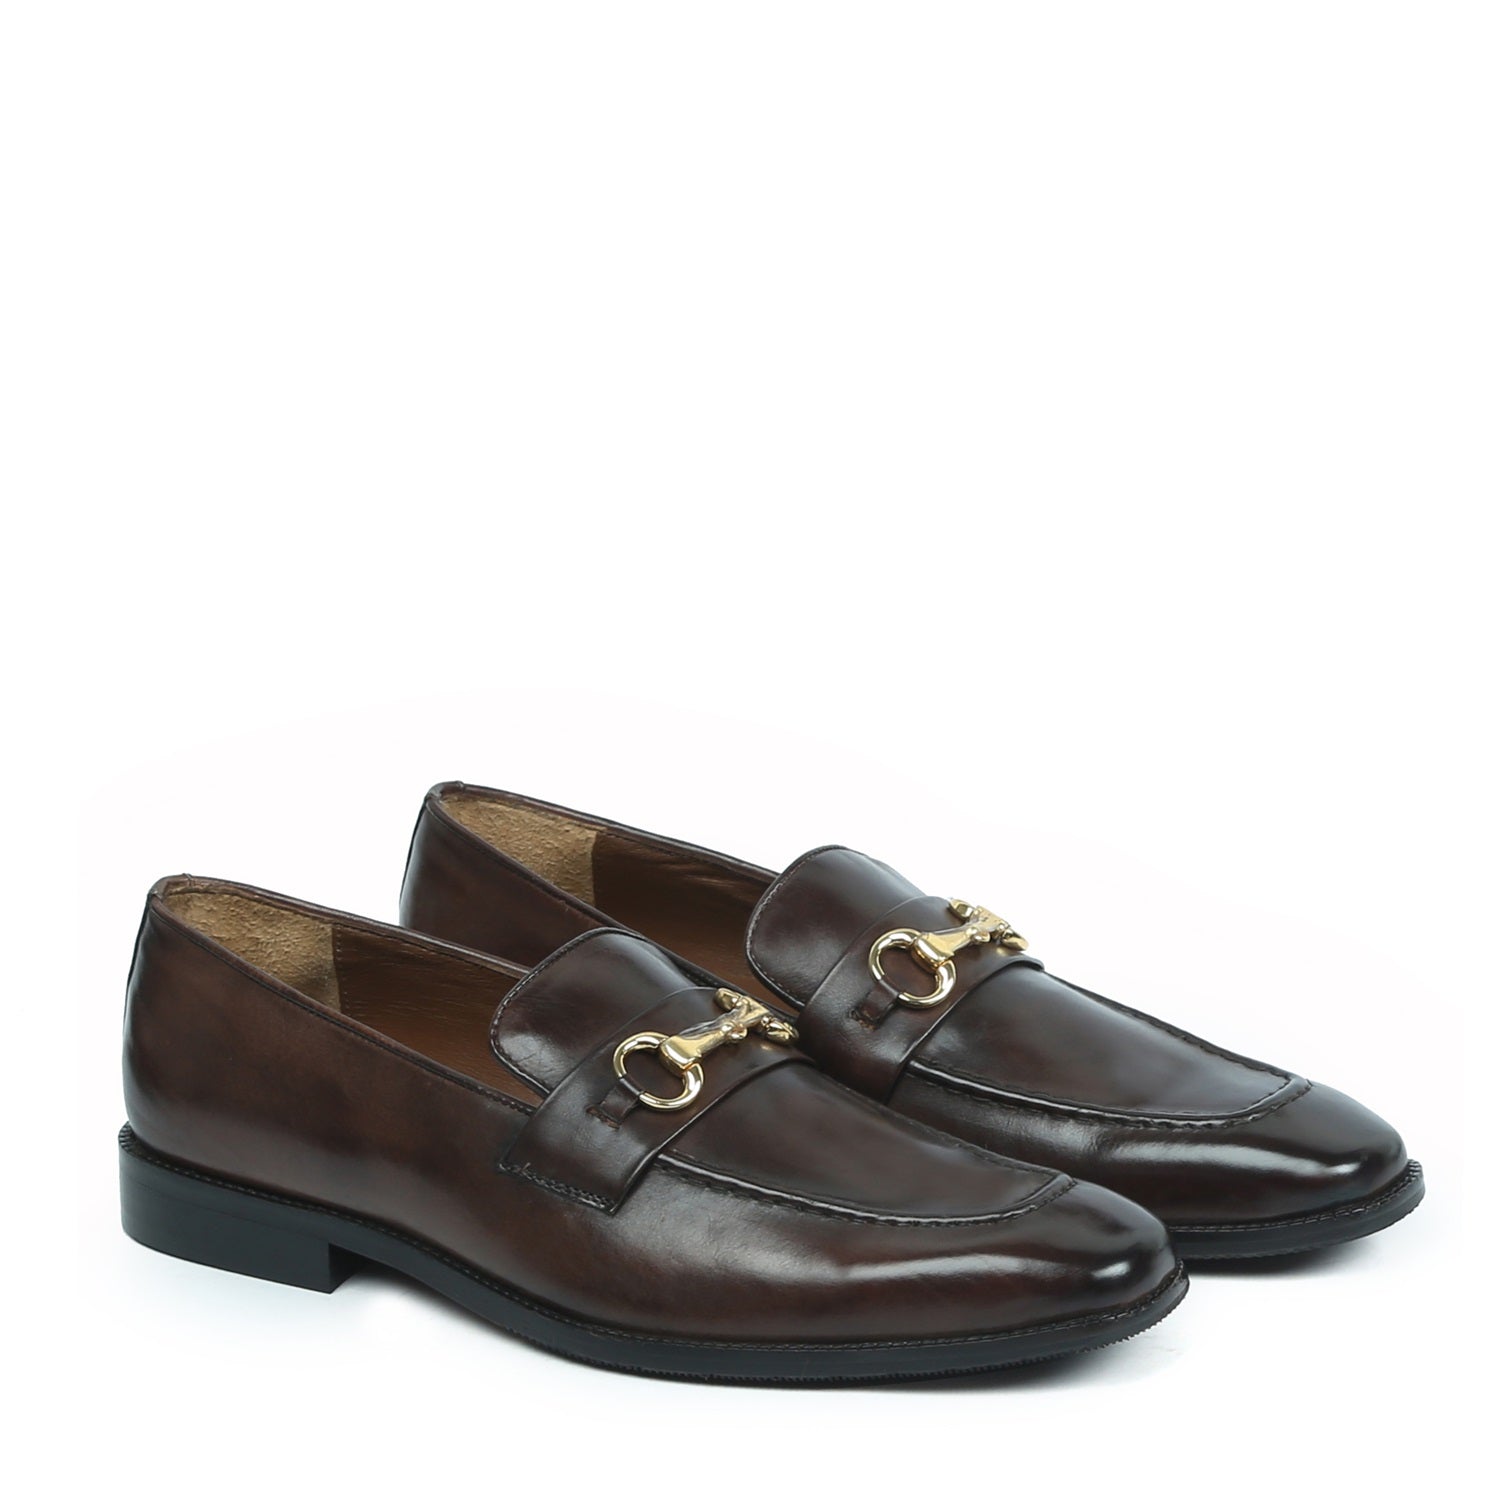 Sleek Dark Brown Leather Loafers With Horse-bit Buckle